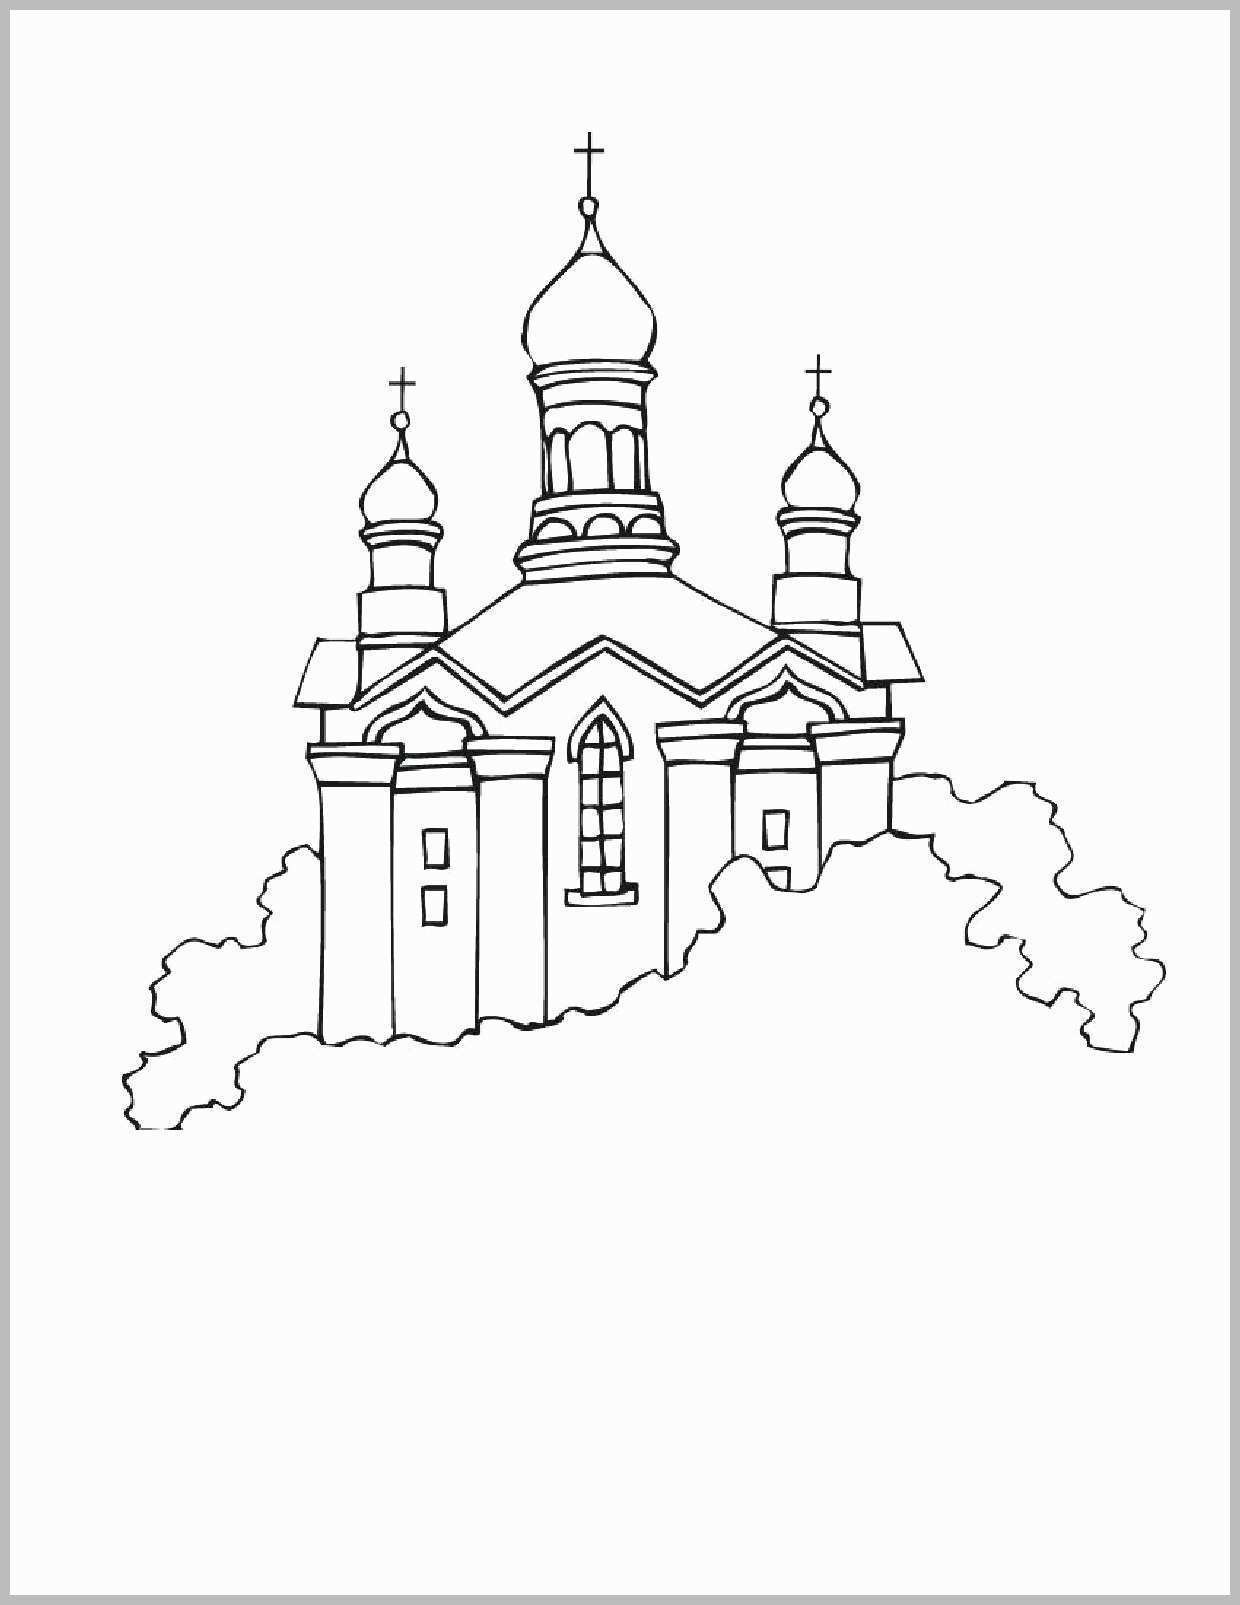 The Best Ideas for Free Printable Coloring Pages for Children #39 s Church